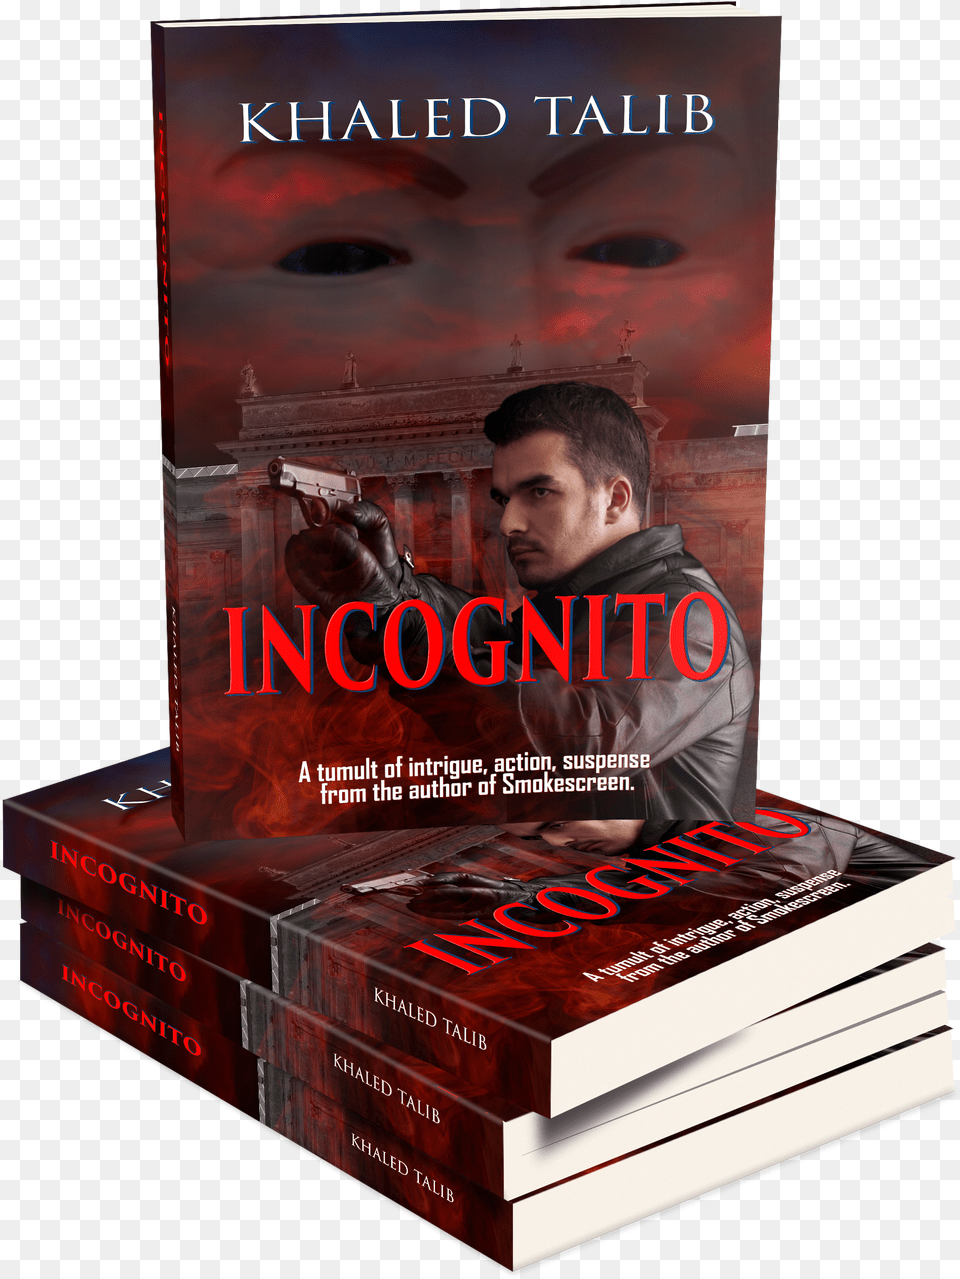 Incognito 3d Book Stack Sch Bn Thnh Cng Nguyn Mnh H Free Transparent Png